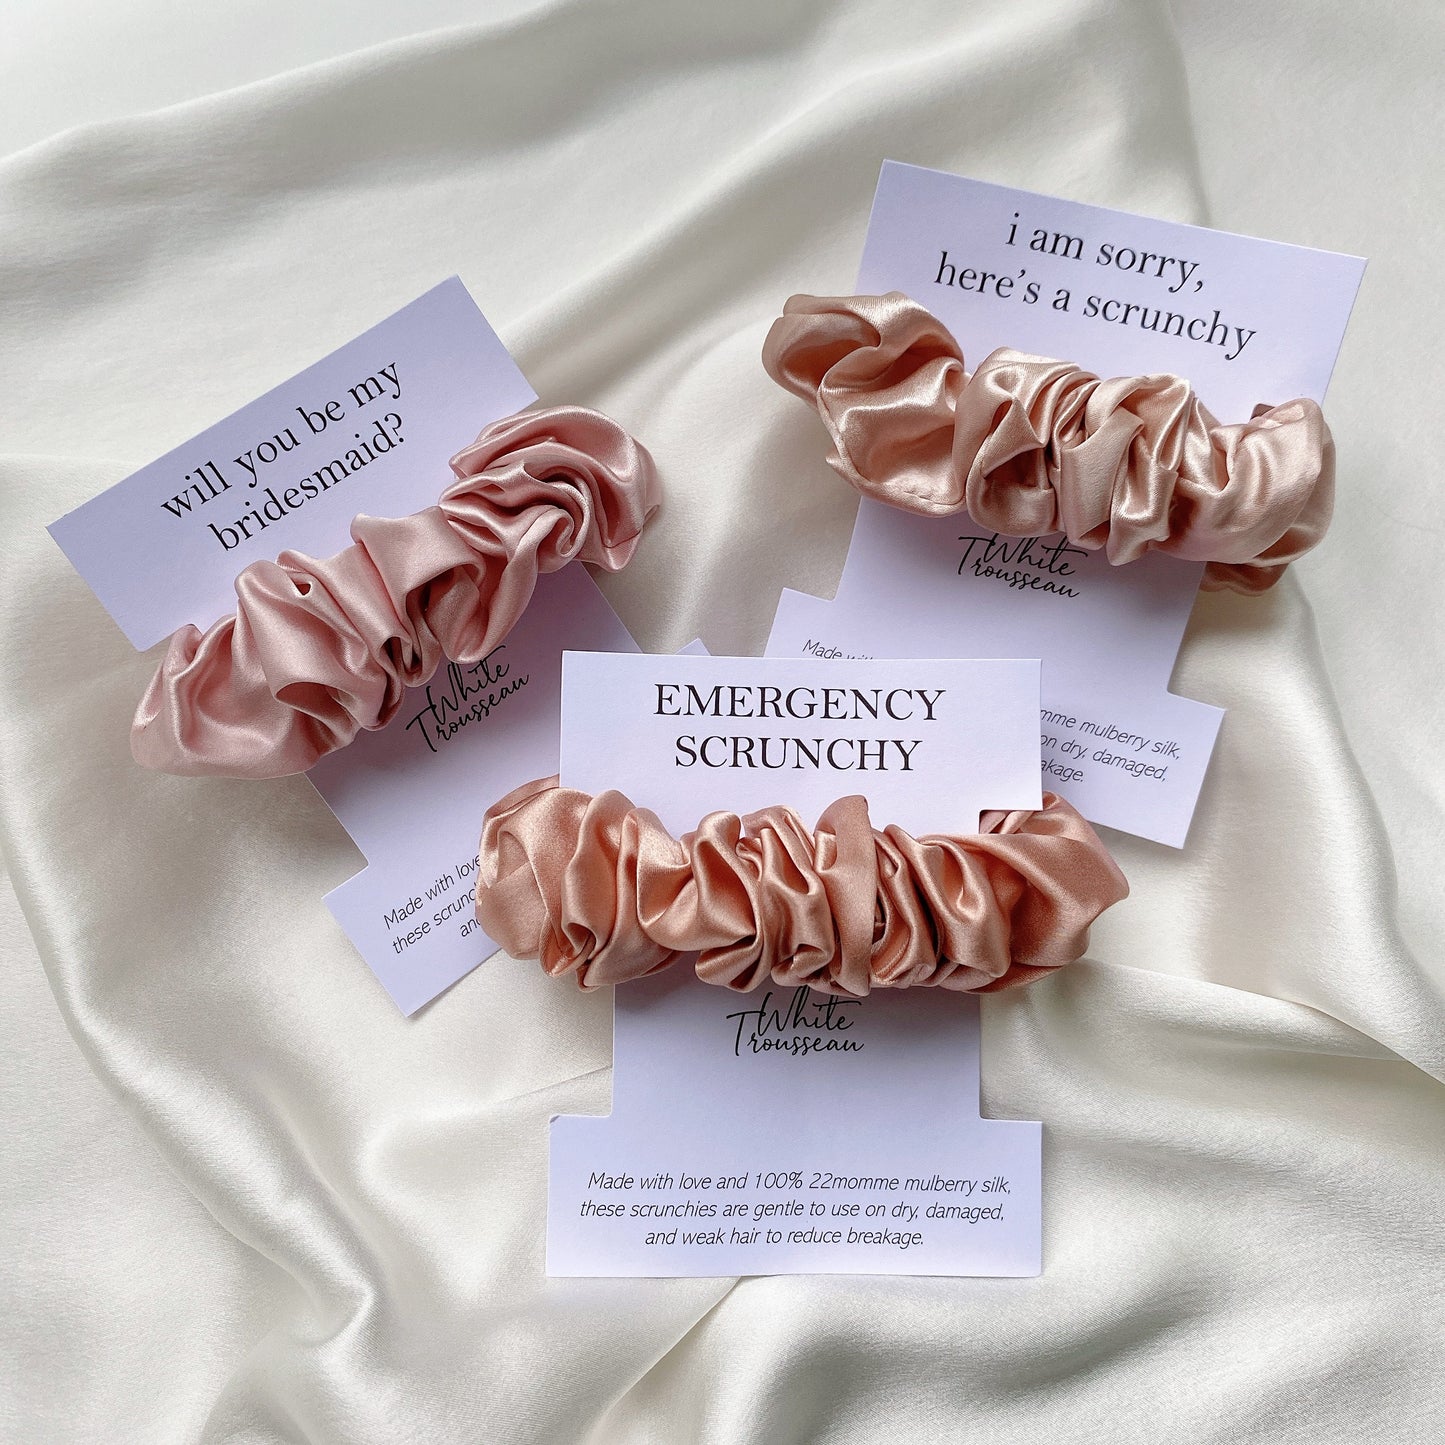 Perfect for birthdays, weddings, or even casual gifting, our silk scrunchies are some of the best affordable gift options in Singapore. Make it special with one of our custom messages to show your love to a friend, family or bridesmaid!